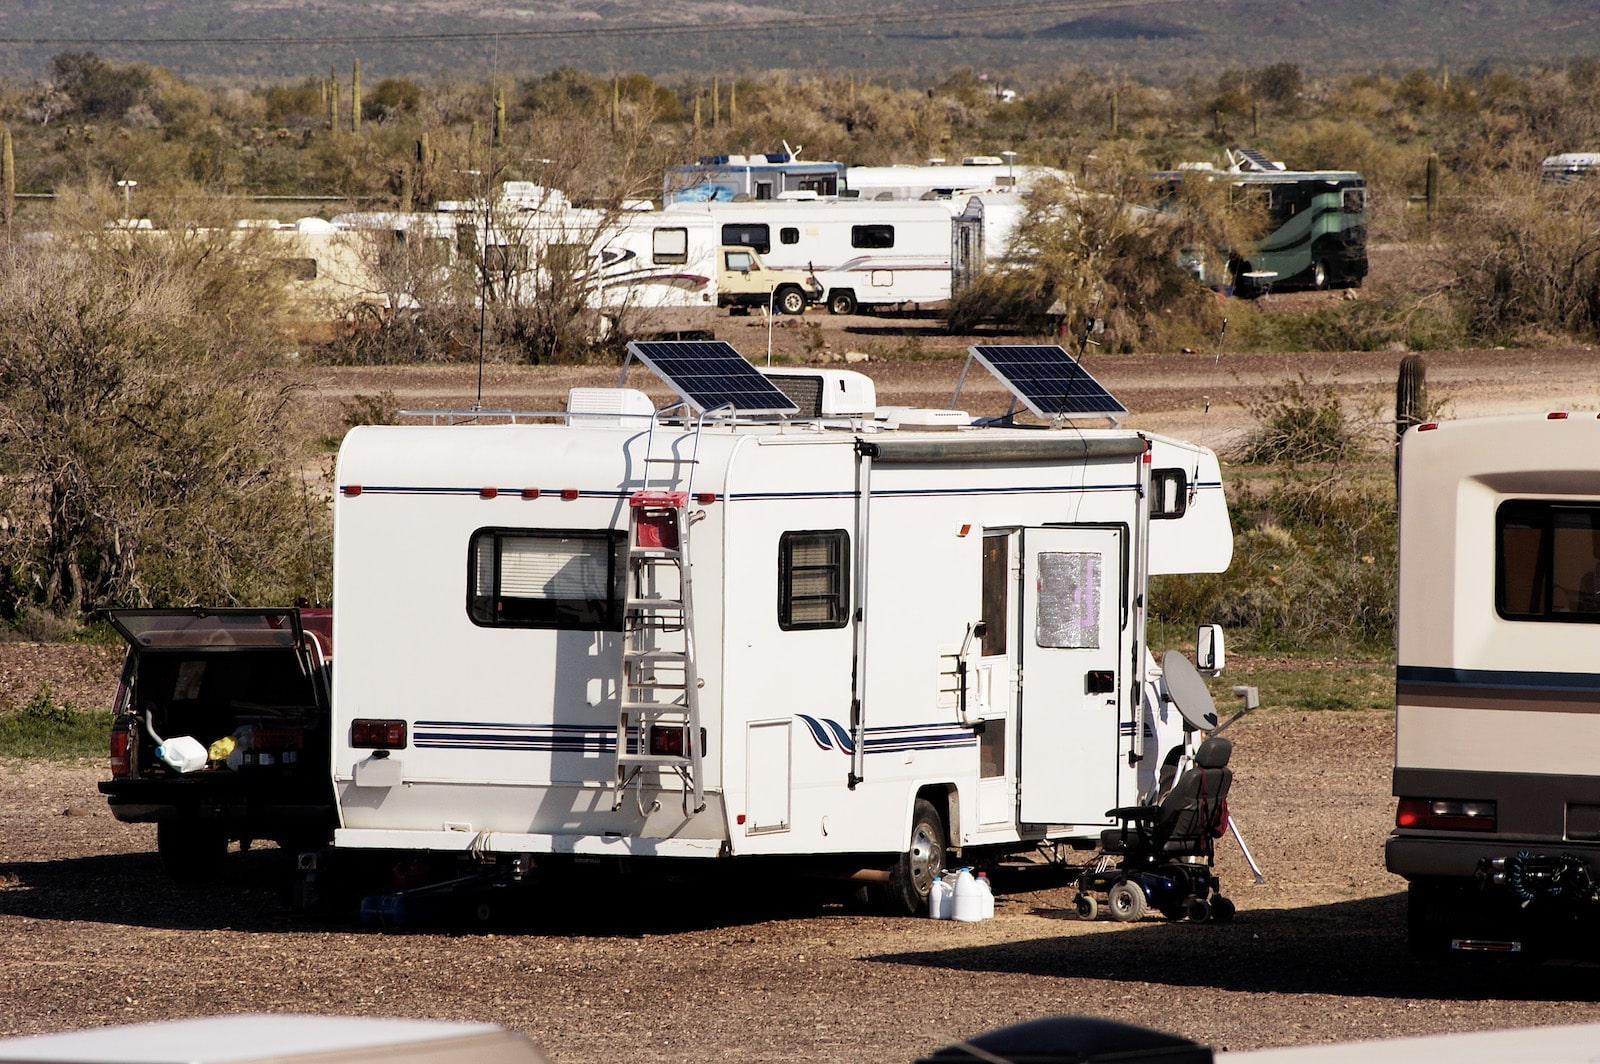 Camping without campground utilities in the Arizona desert.